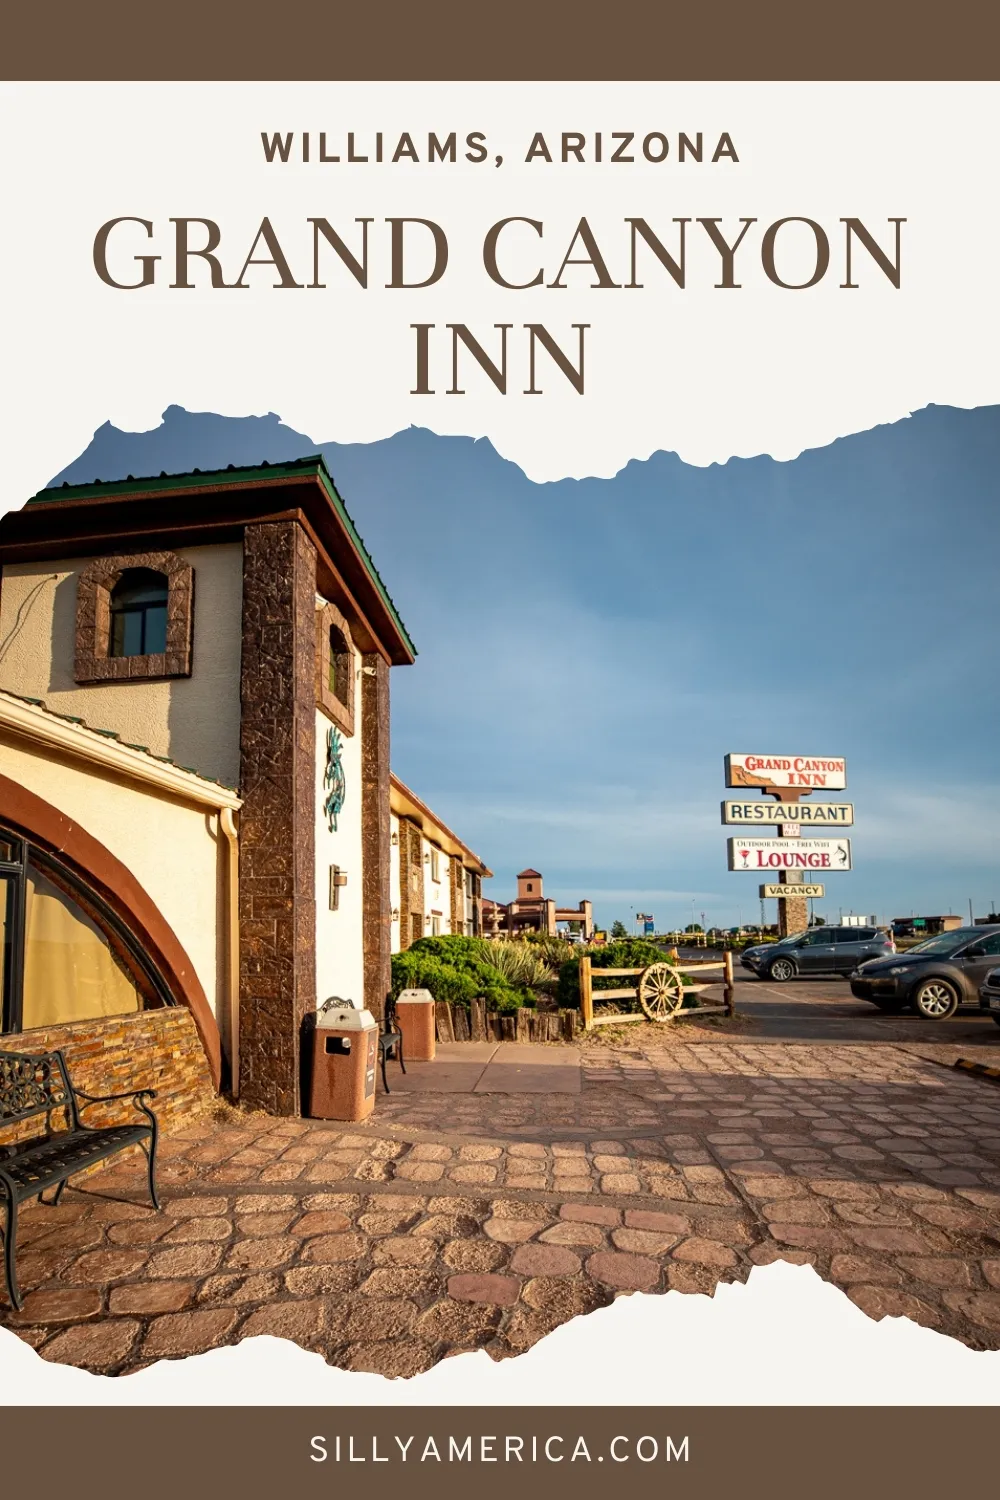 Looking for a grand place to stay on a Grand Canyon road trip? The Grand Canyon Inn in Williams, Arizona is located only about 20 minutes from the Grand Canyon's south entrance, making it a convenient place to spend the night before or after visiting the National Park. Located near the entrance to the Grand Canyon and near Route 66 this hotel is convenient for road trippers looking for a place to spend the night in Arizona. #Route66 #Route66RoadTrip #GrandCanyon #GrandCanyonRoadTrip #Hotel